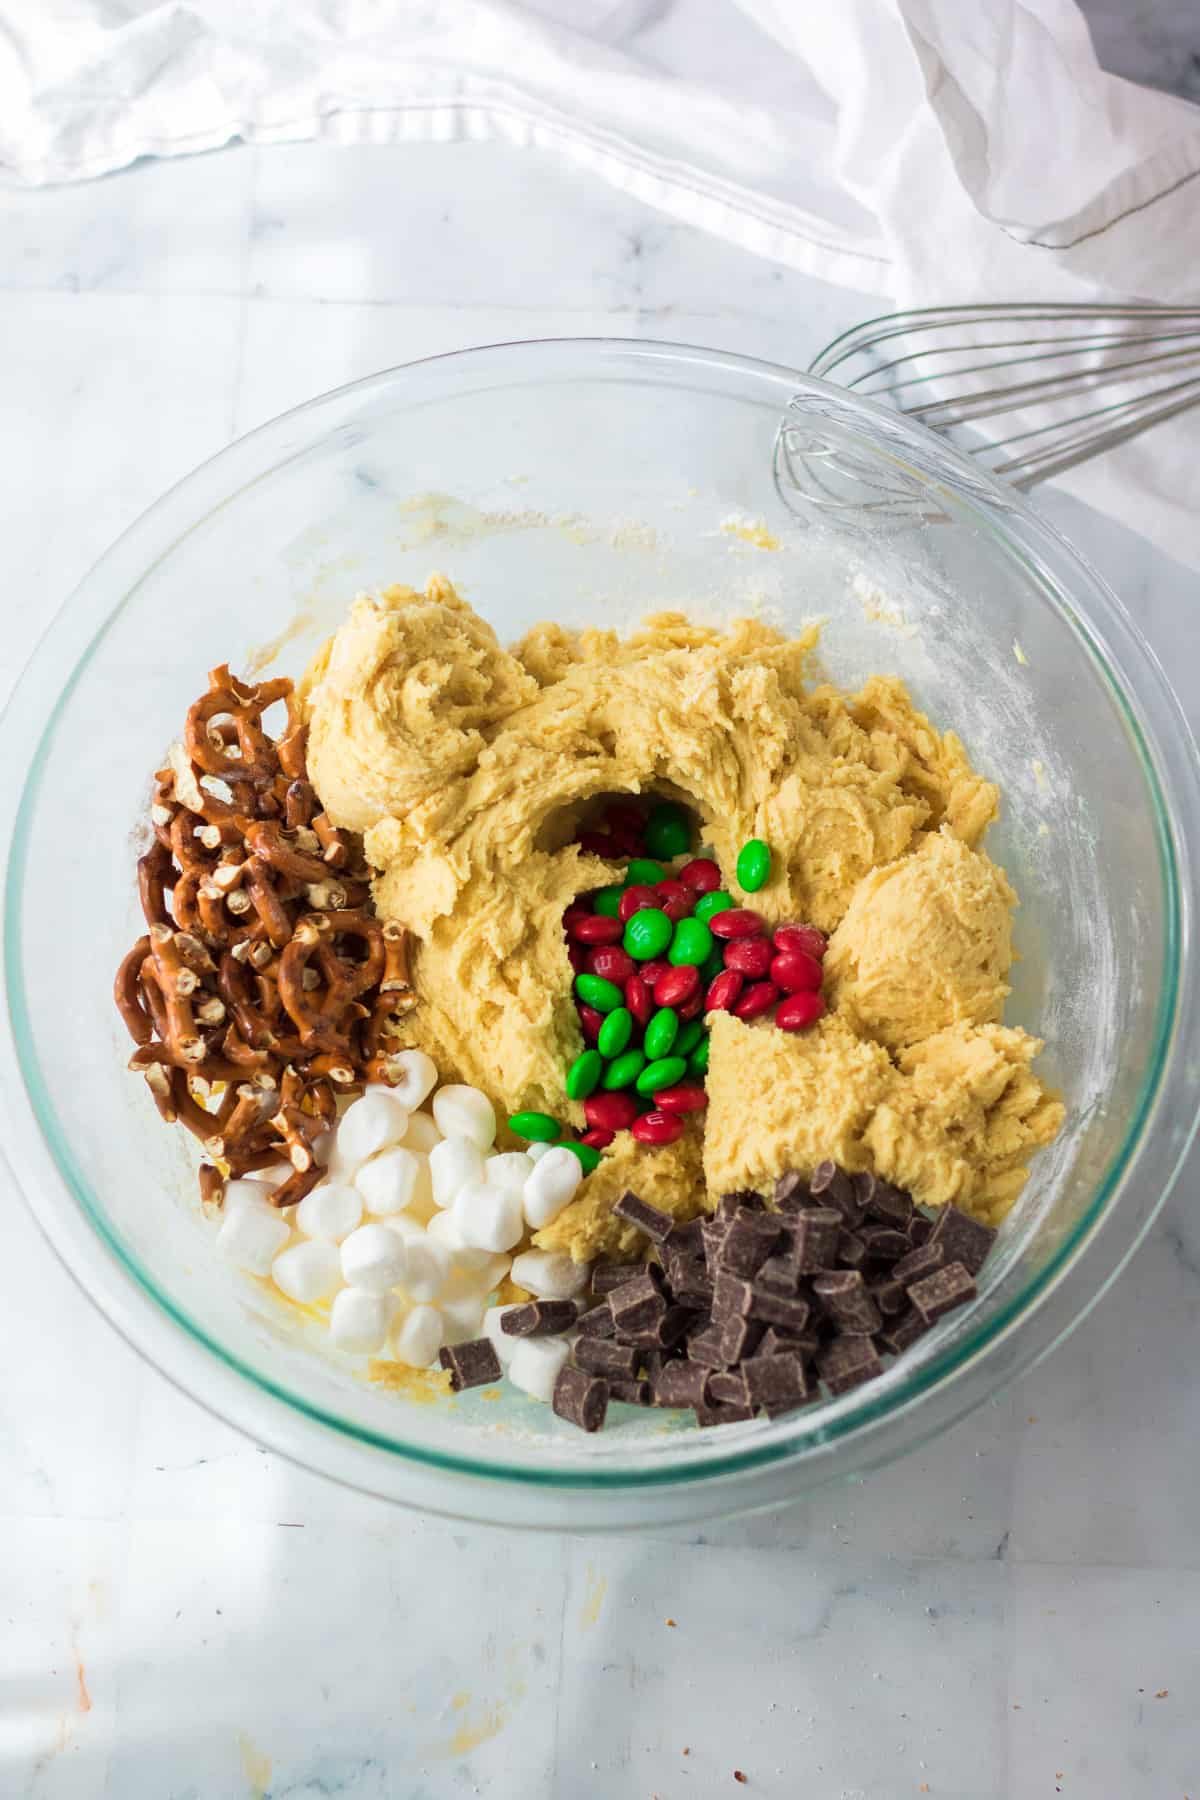 Cookie dough being mixed with red and green M&Ms, chocolate chunks, pretzels and marshmallows in a mixing bowl from overhead on a counter.